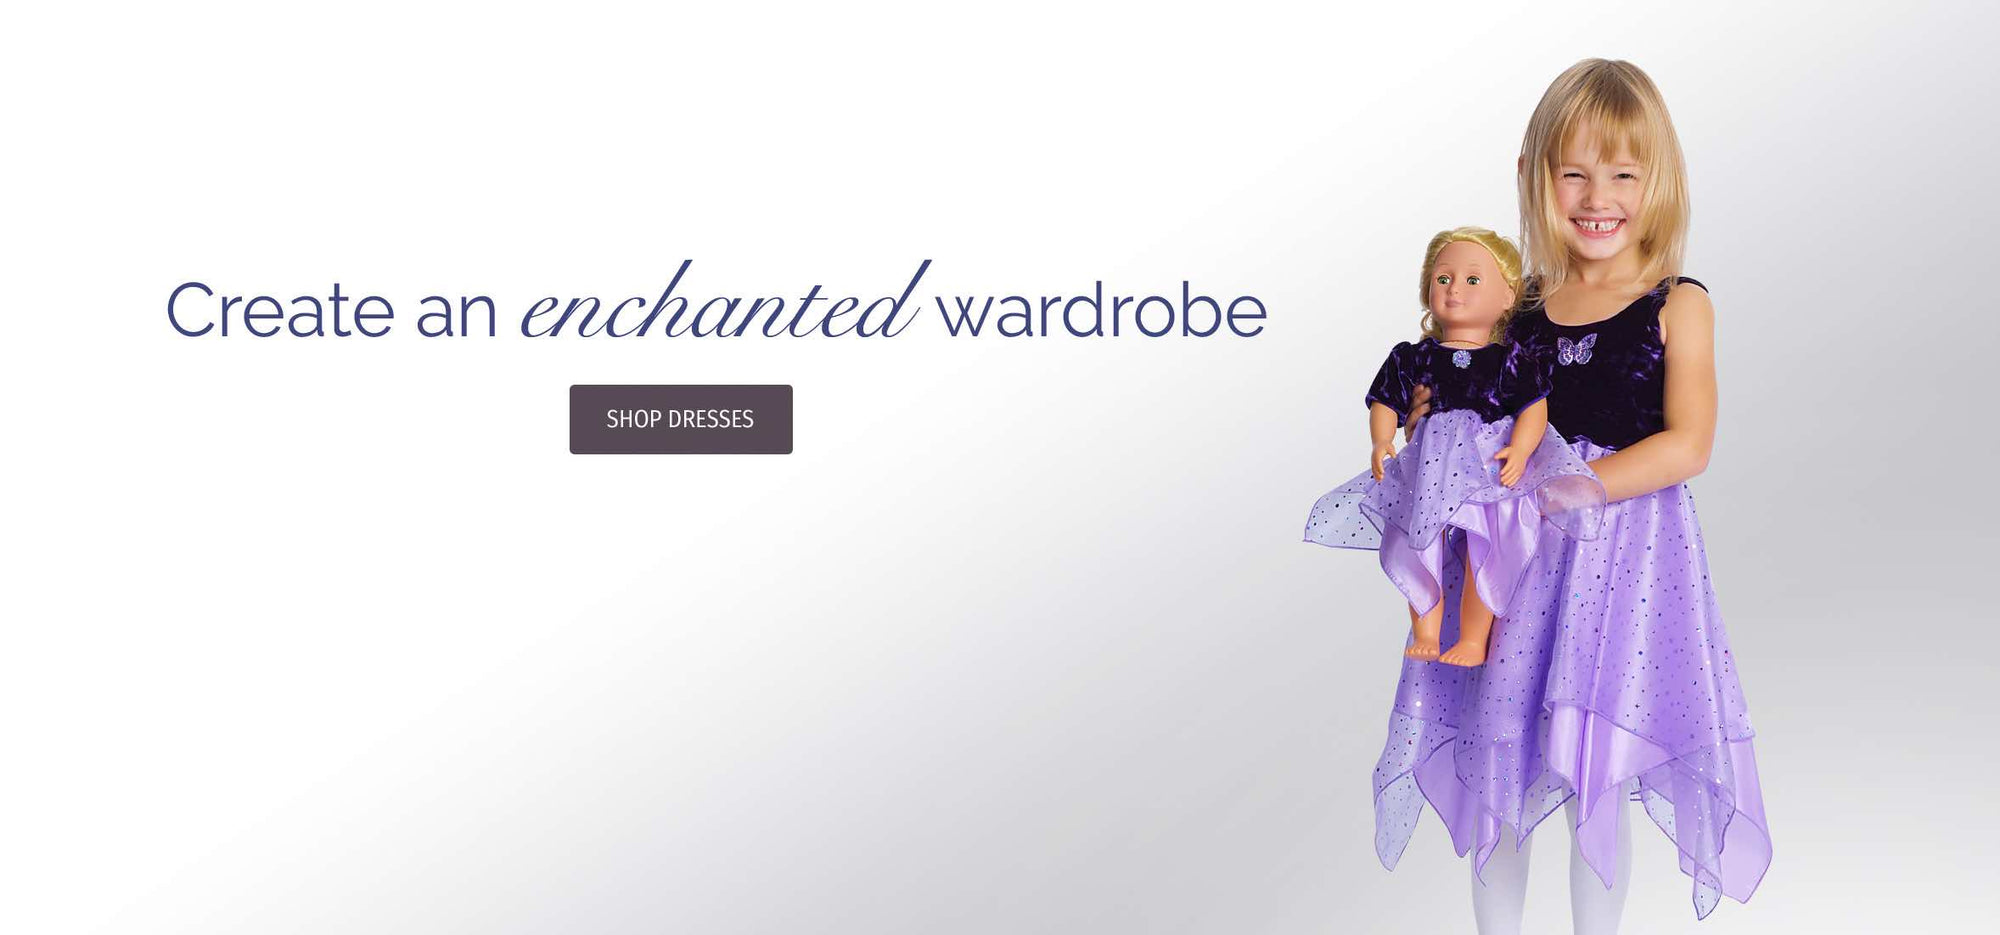 Image of girl and doll wearing matching purple princess dresses. Text reads: Create an enchanted wardrobe